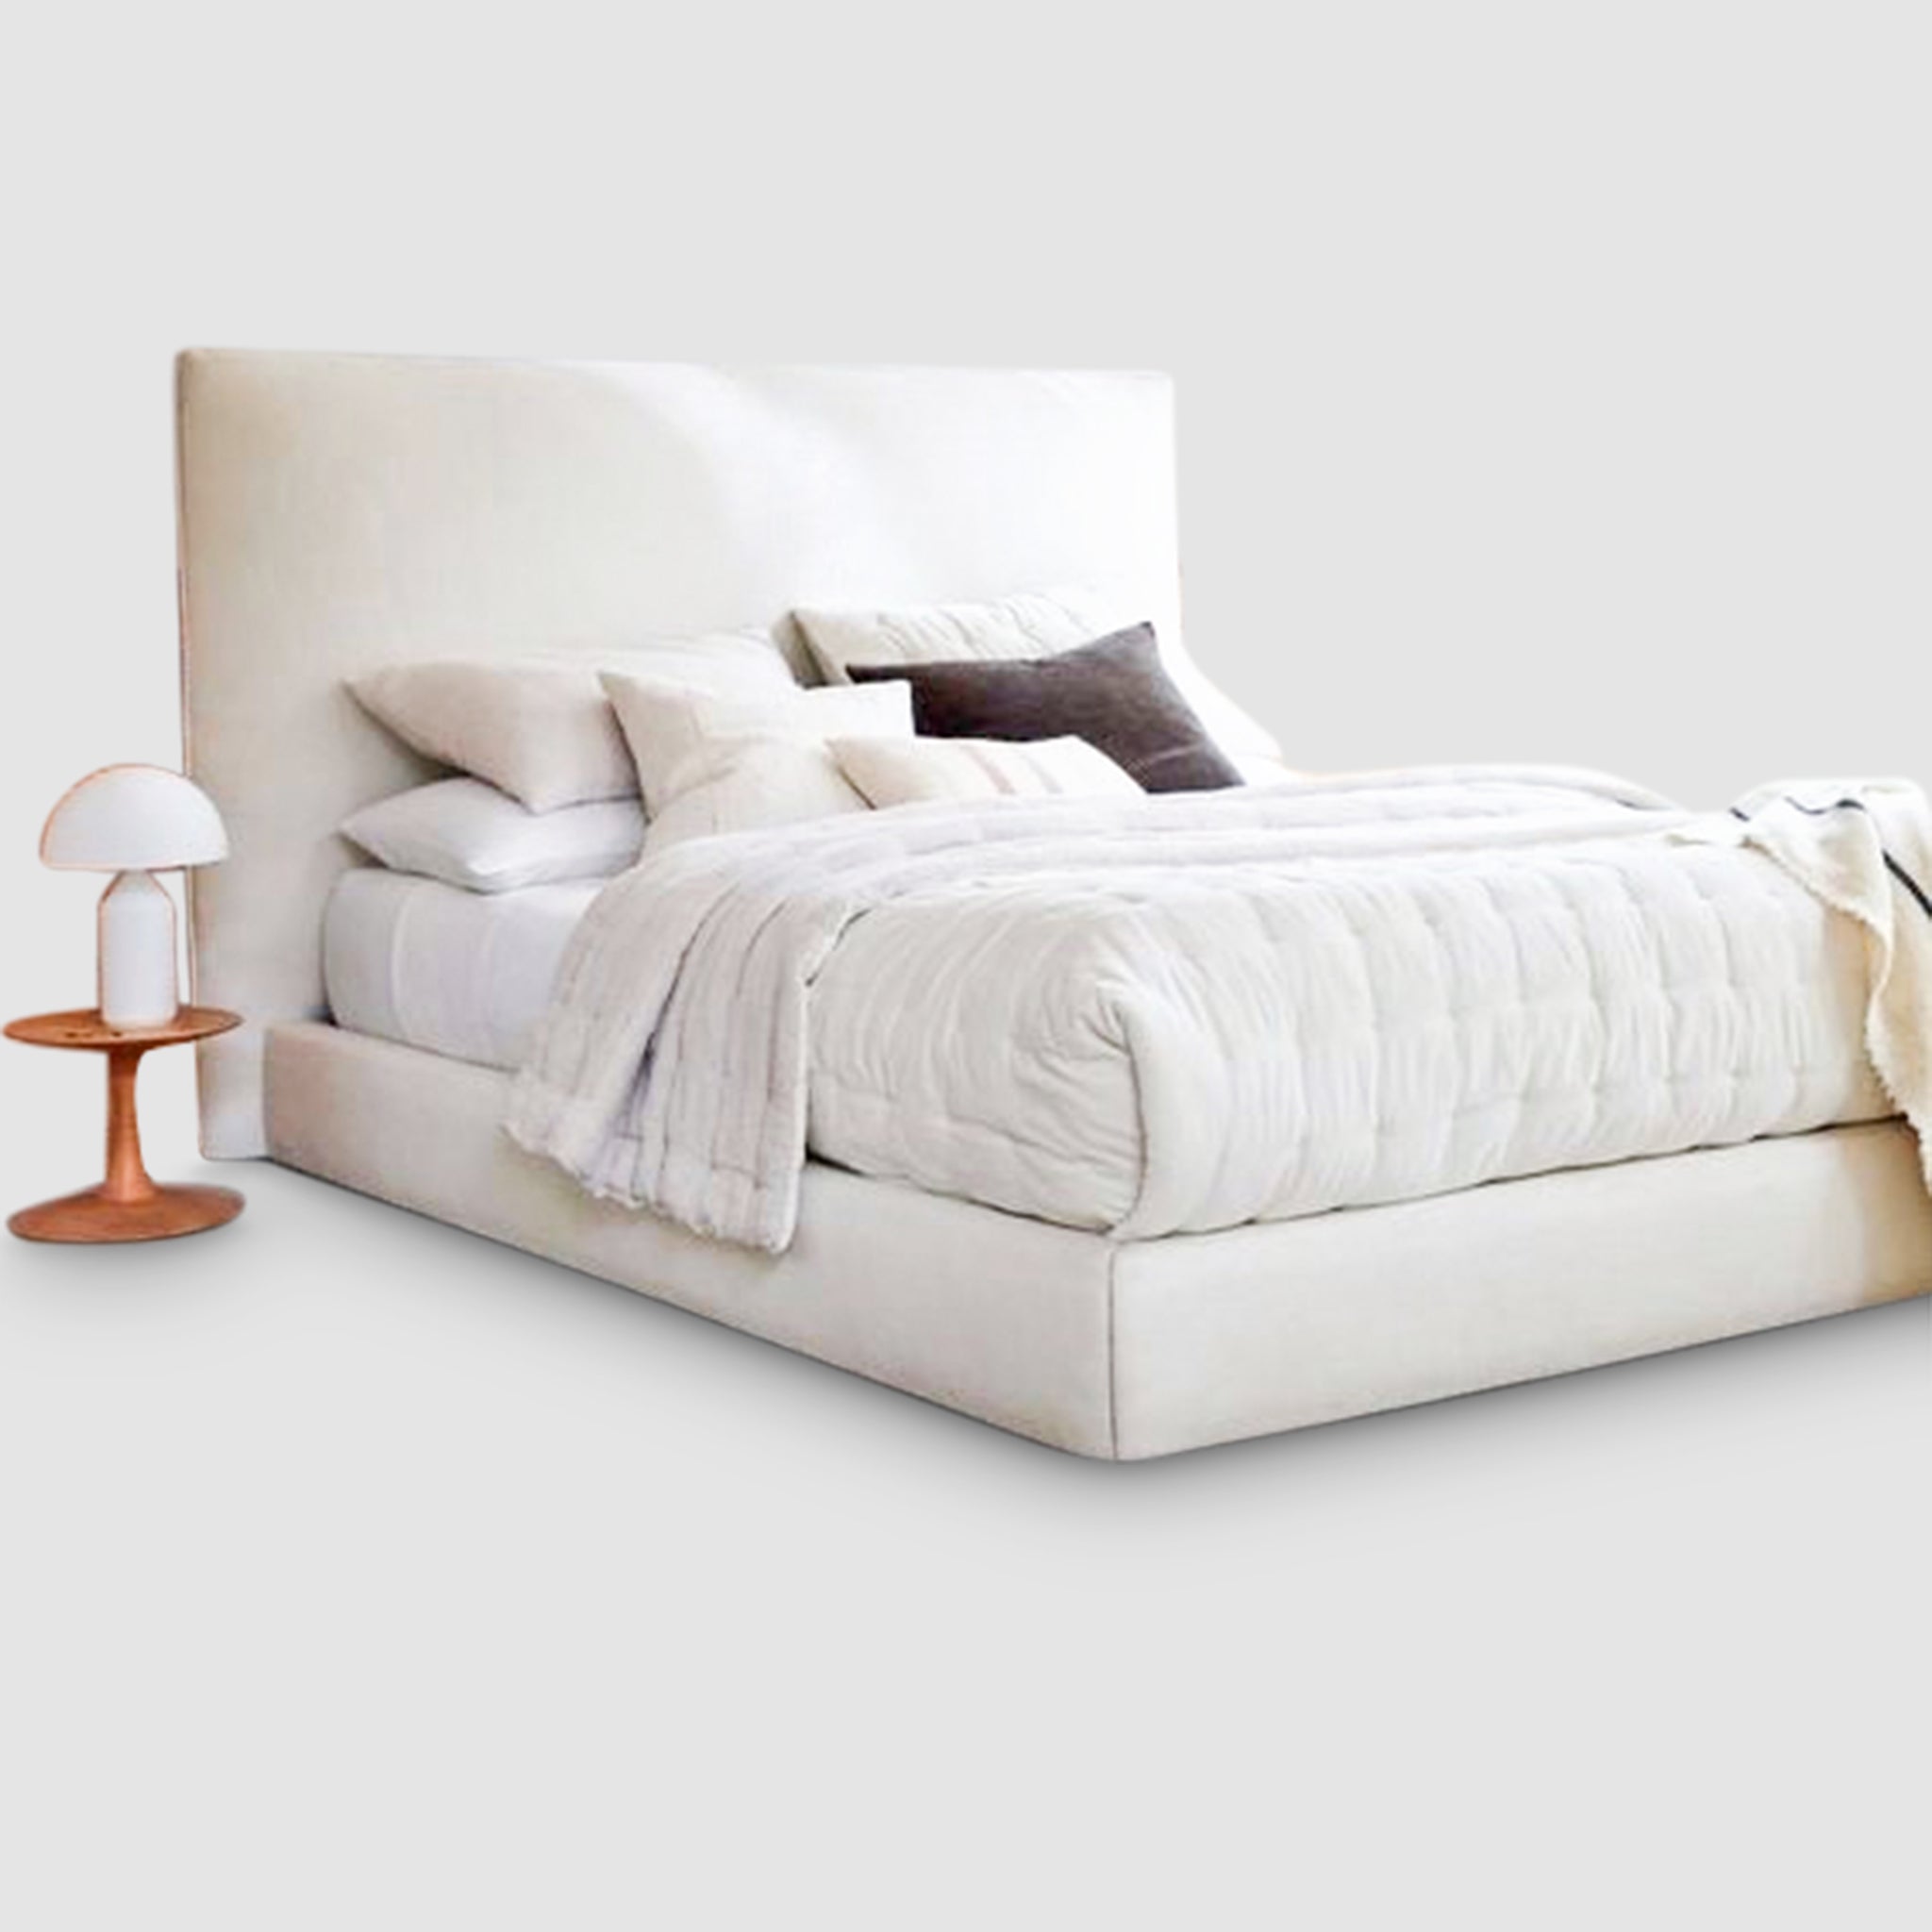 Comfy daybed with plush pillows and cozy throw. Versatile furniture for a relaxing bedroom.